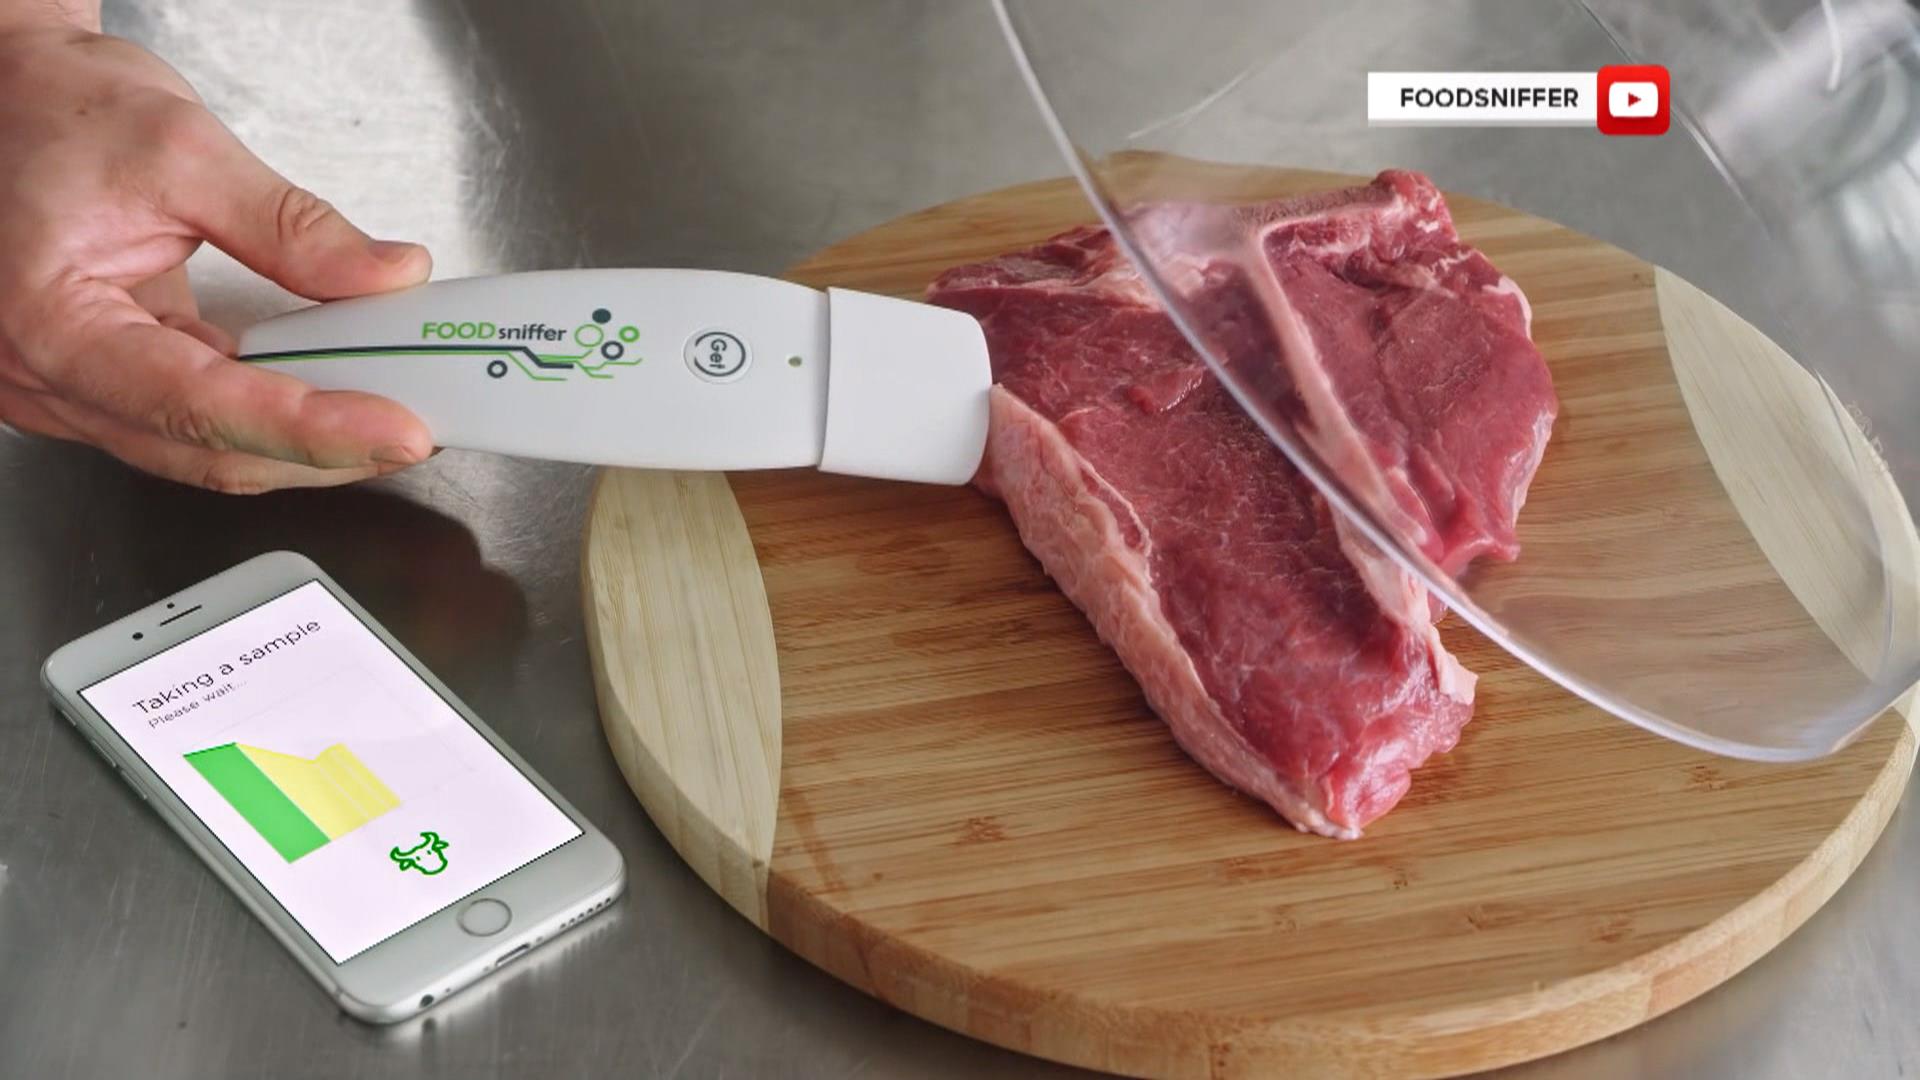 This kitchen tool sniffs out rotten food before you eat it